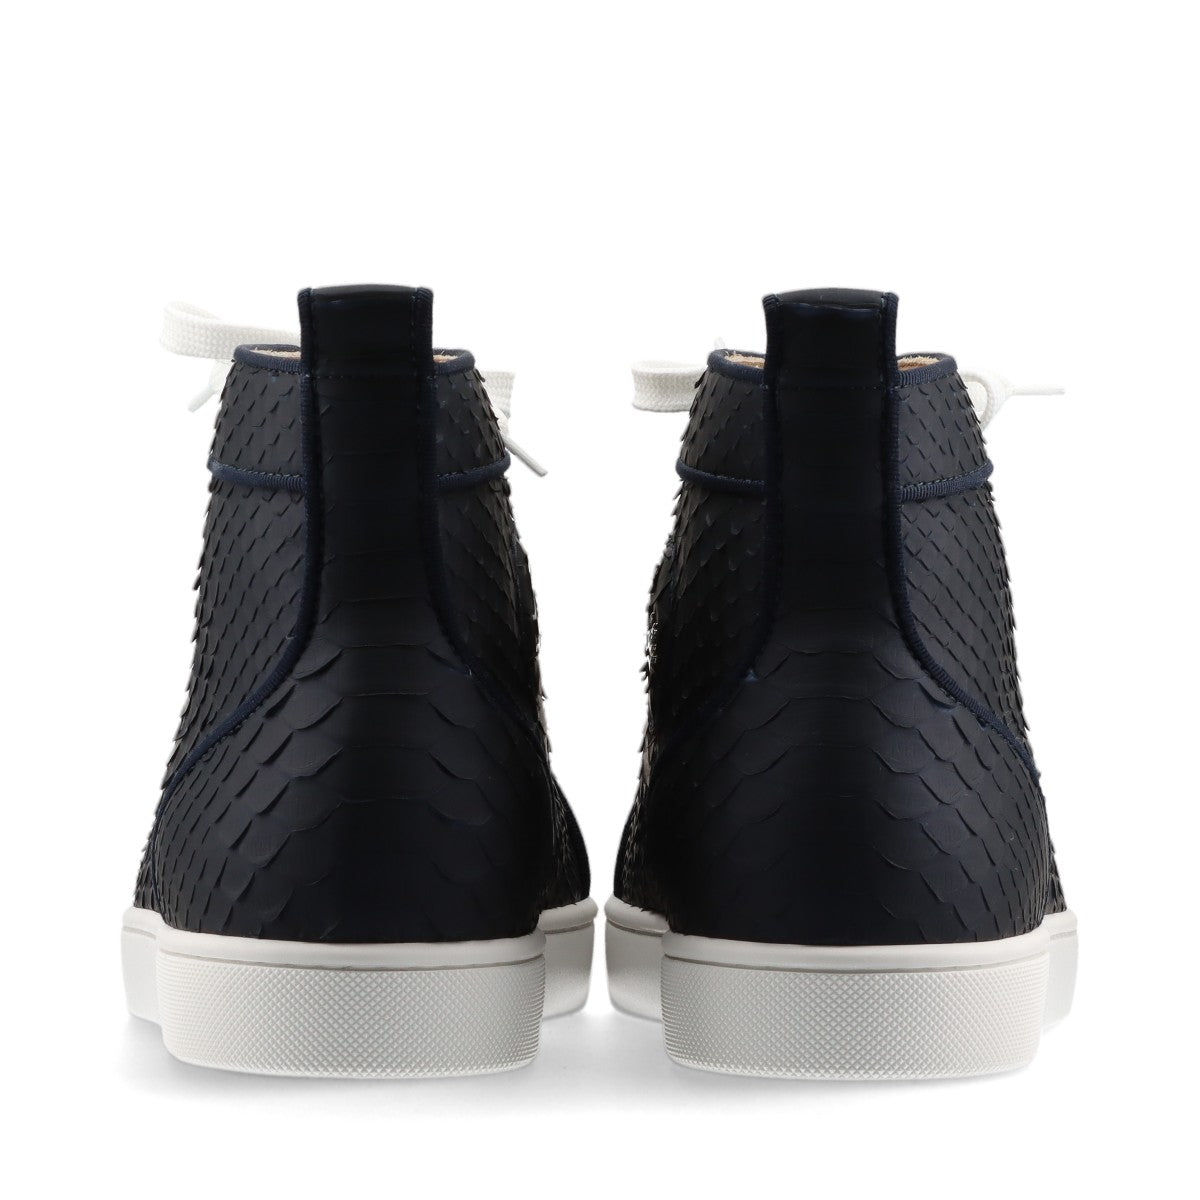 Christian Louboutin Louis Strass Leather High-top Sneakers 43.5 Men's Navy blue Rhinestone Python Replaceable cord box There is a storage bag